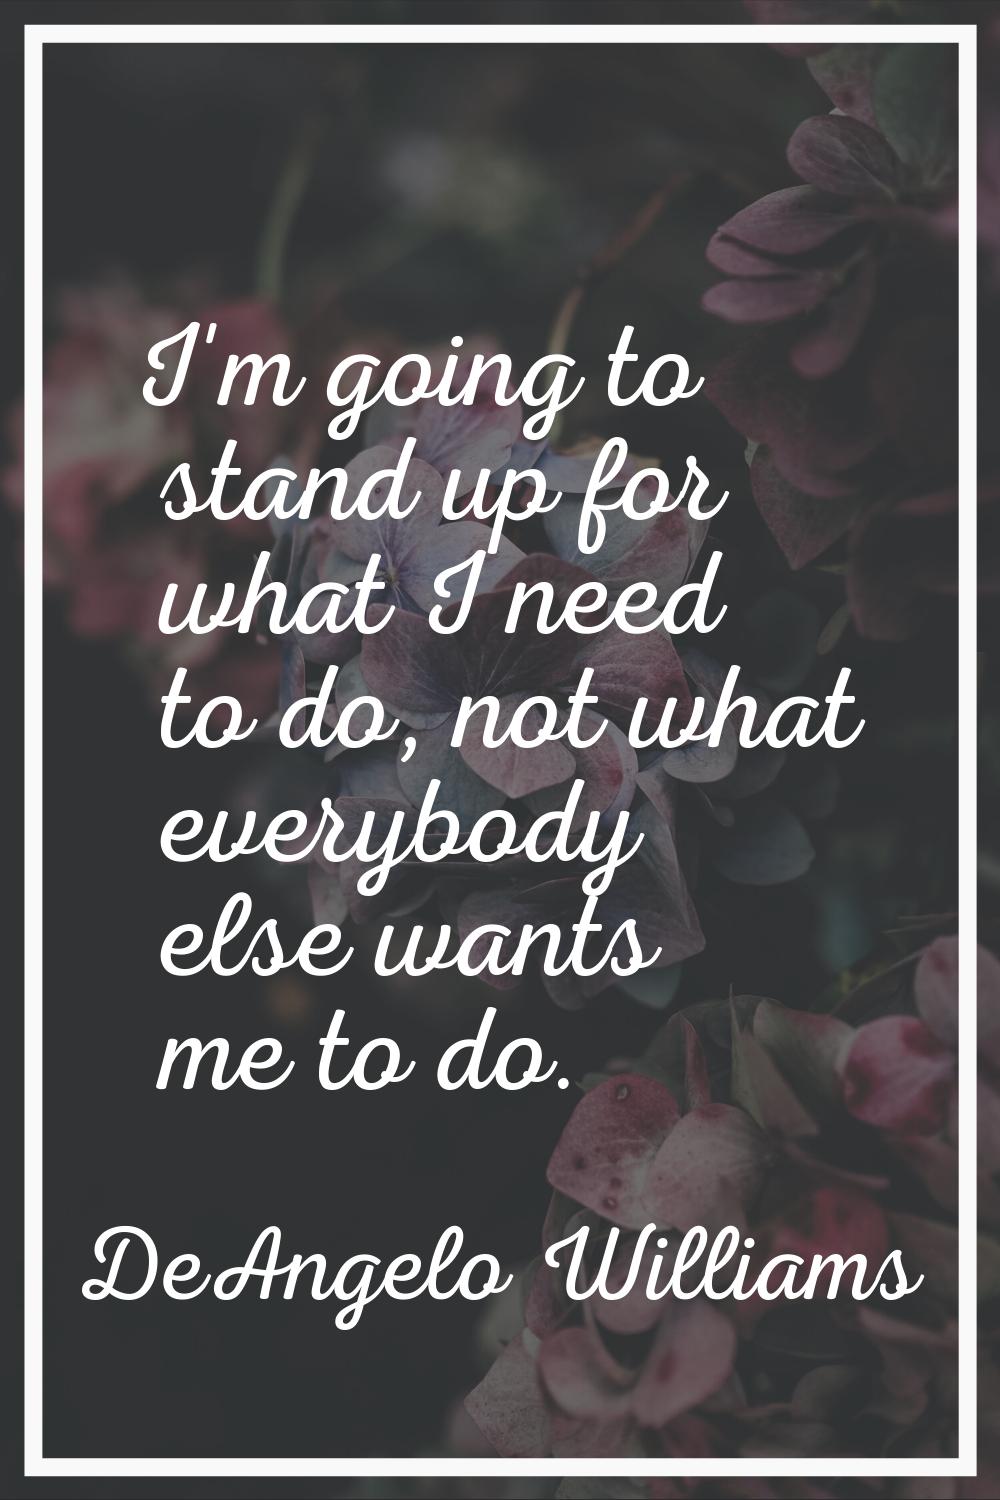 I'm going to stand up for what I need to do, not what everybody else wants me to do.